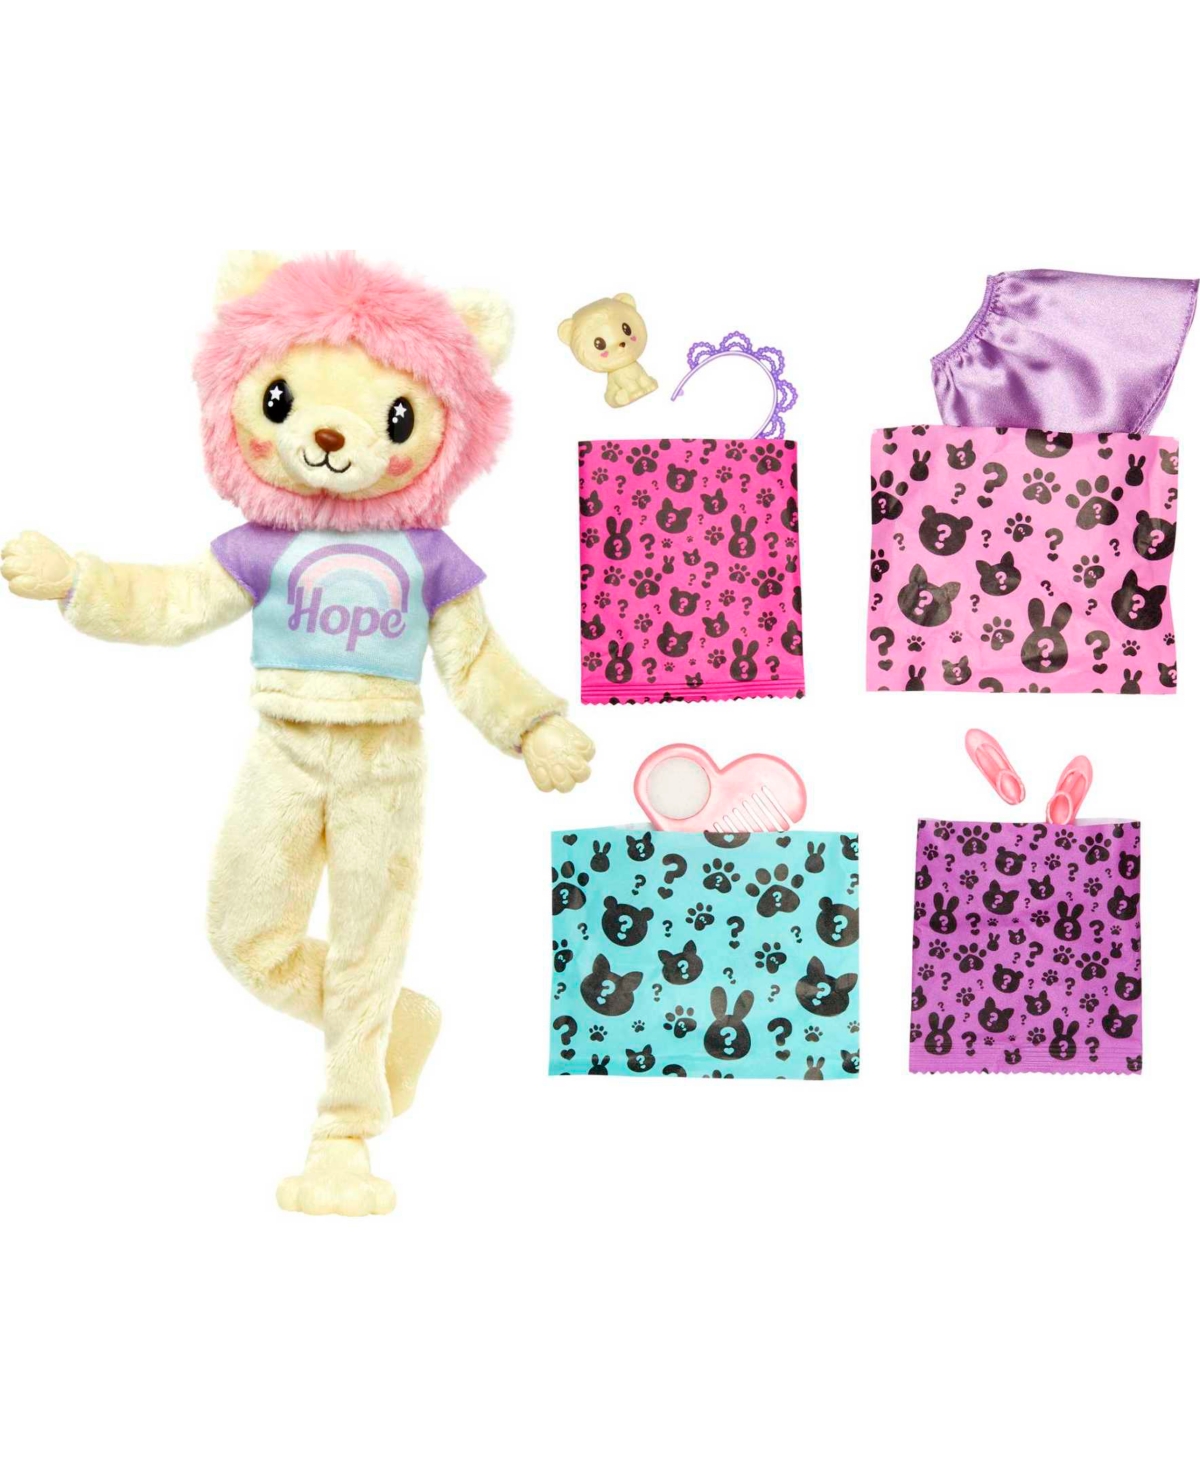 Shop Barbie Cutie Reveal Doll And Accessories, Cozy Cute T-shirts Poodle, "star" T-shirt, Blue And Purple Streak In Multi-color